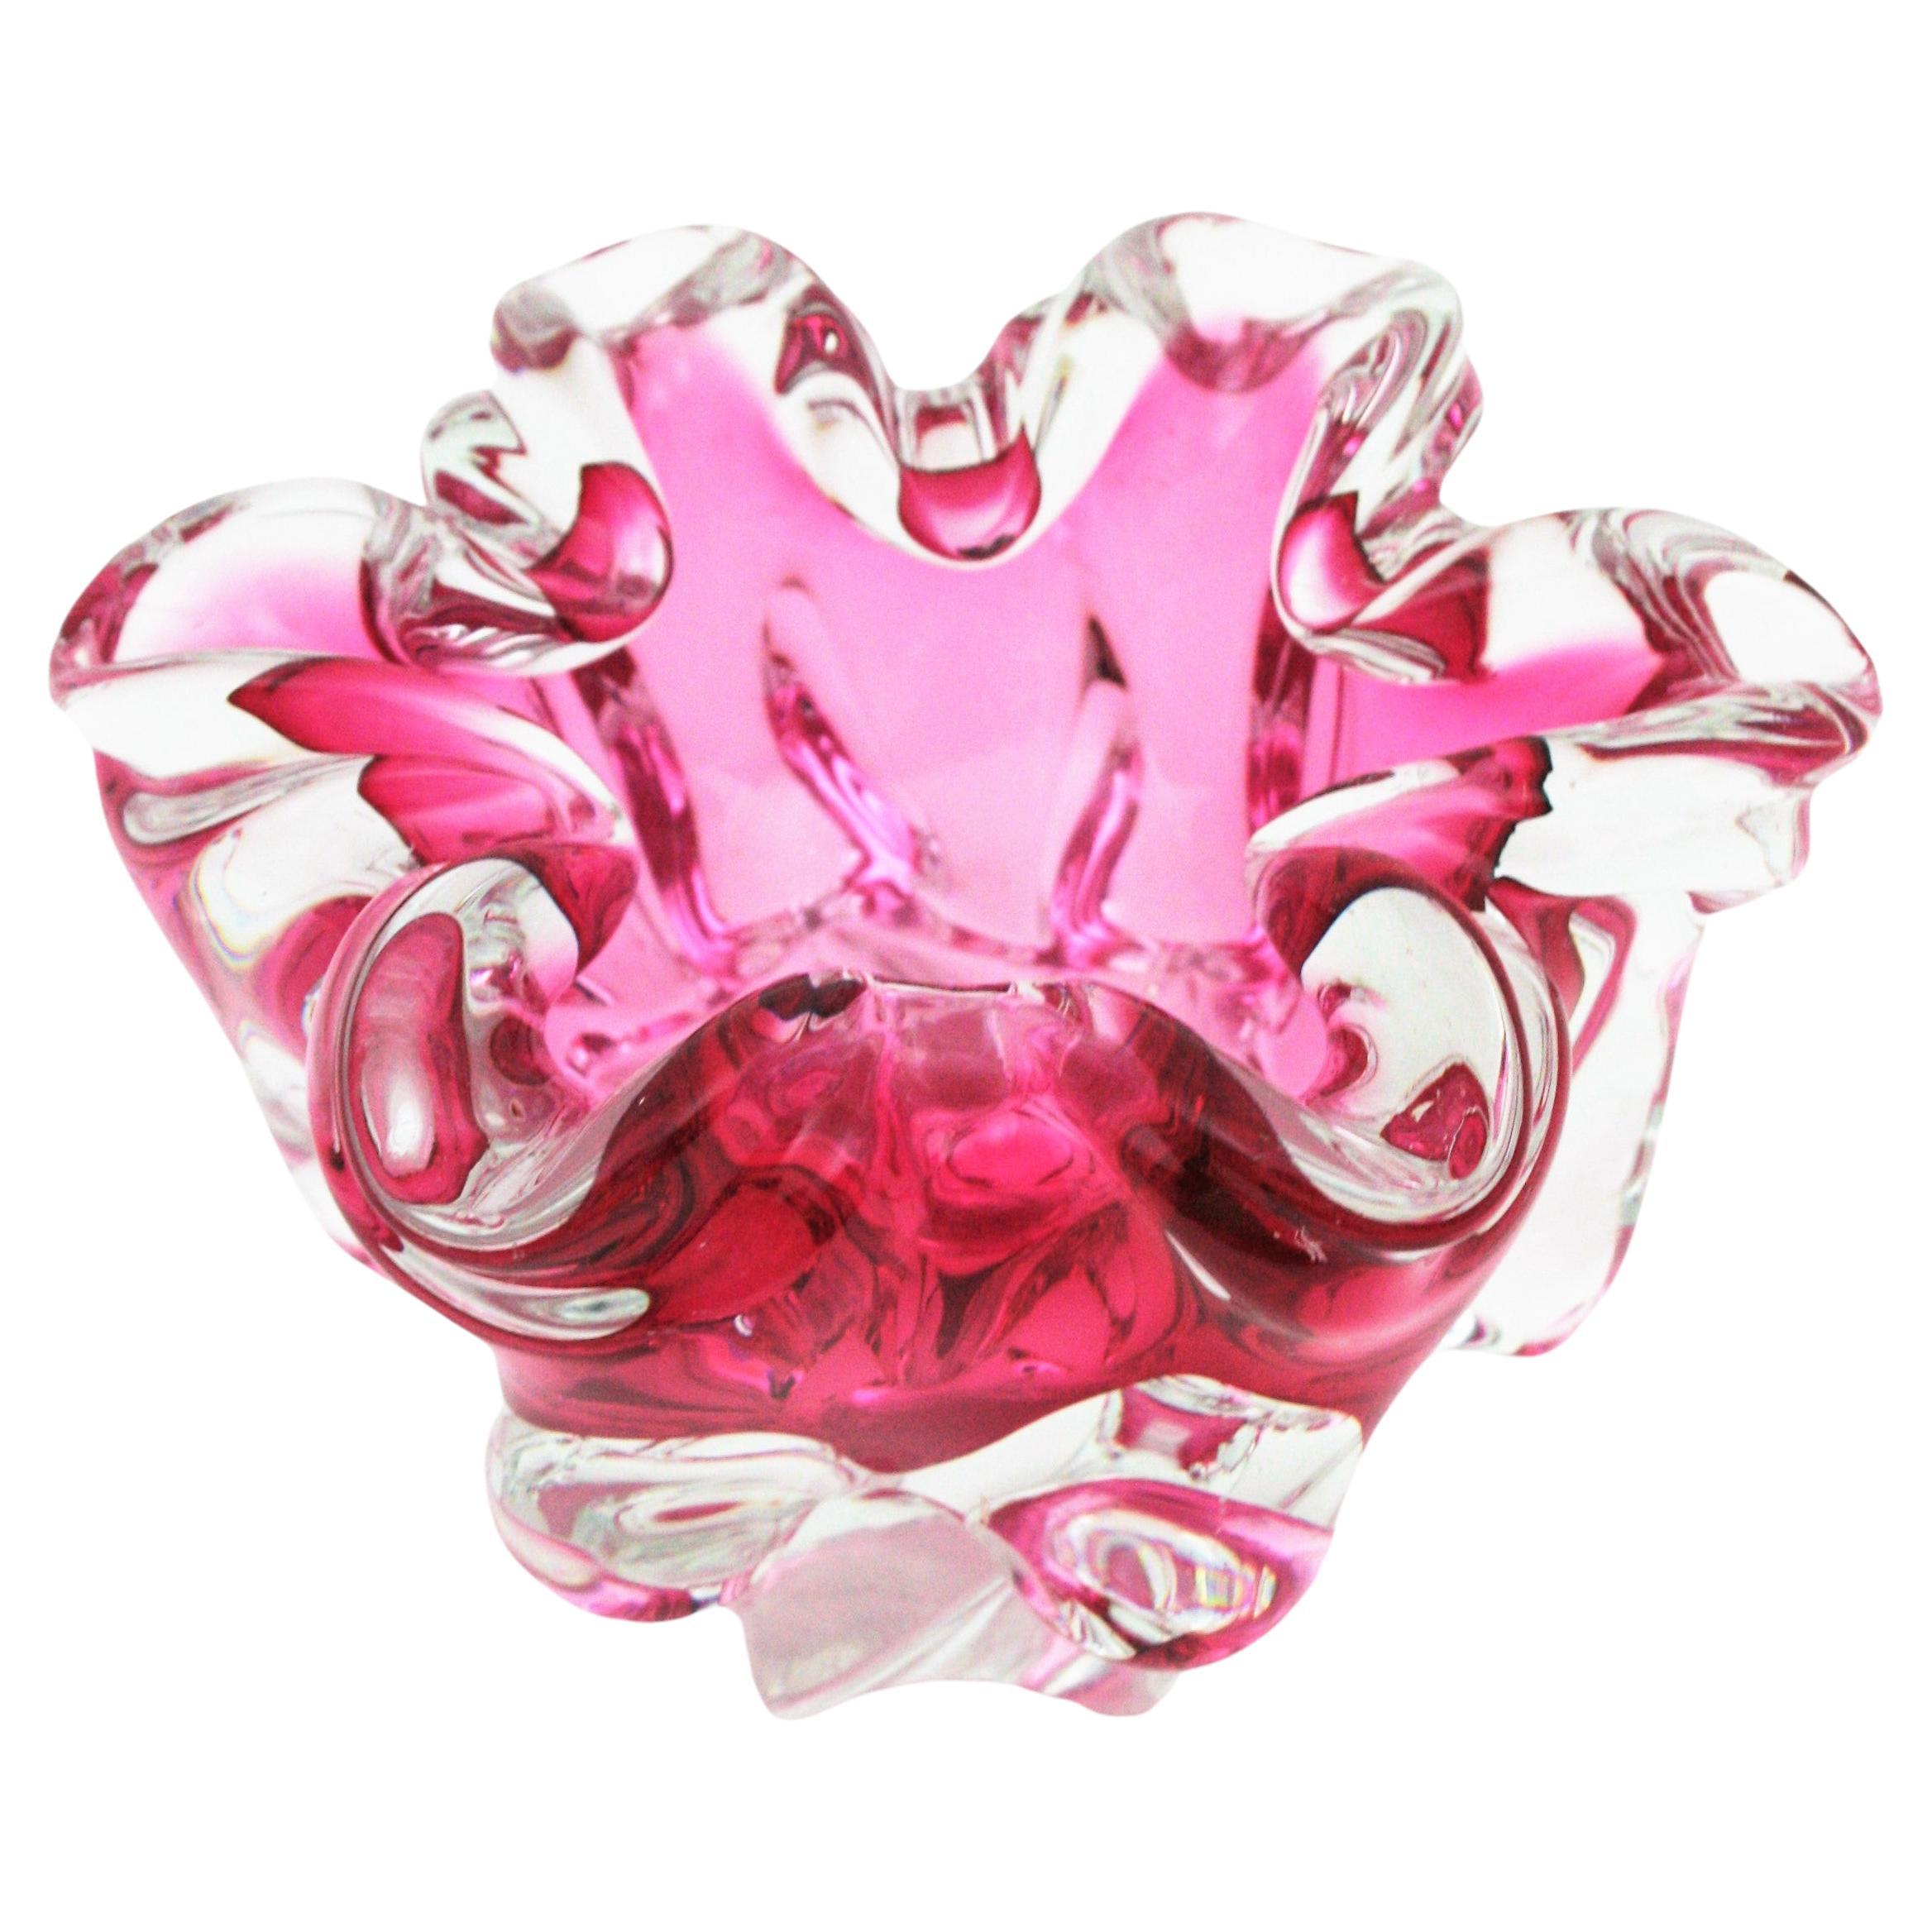 Handblown Murano glass pink and clear Sommerso footed bowl or ashtray. Attributed to Alfredo Barbini. Italy, 1950s.
This organic shaped bowl is made with pink glass submerged into clear glass. It has beautiful details with pulled glass creating